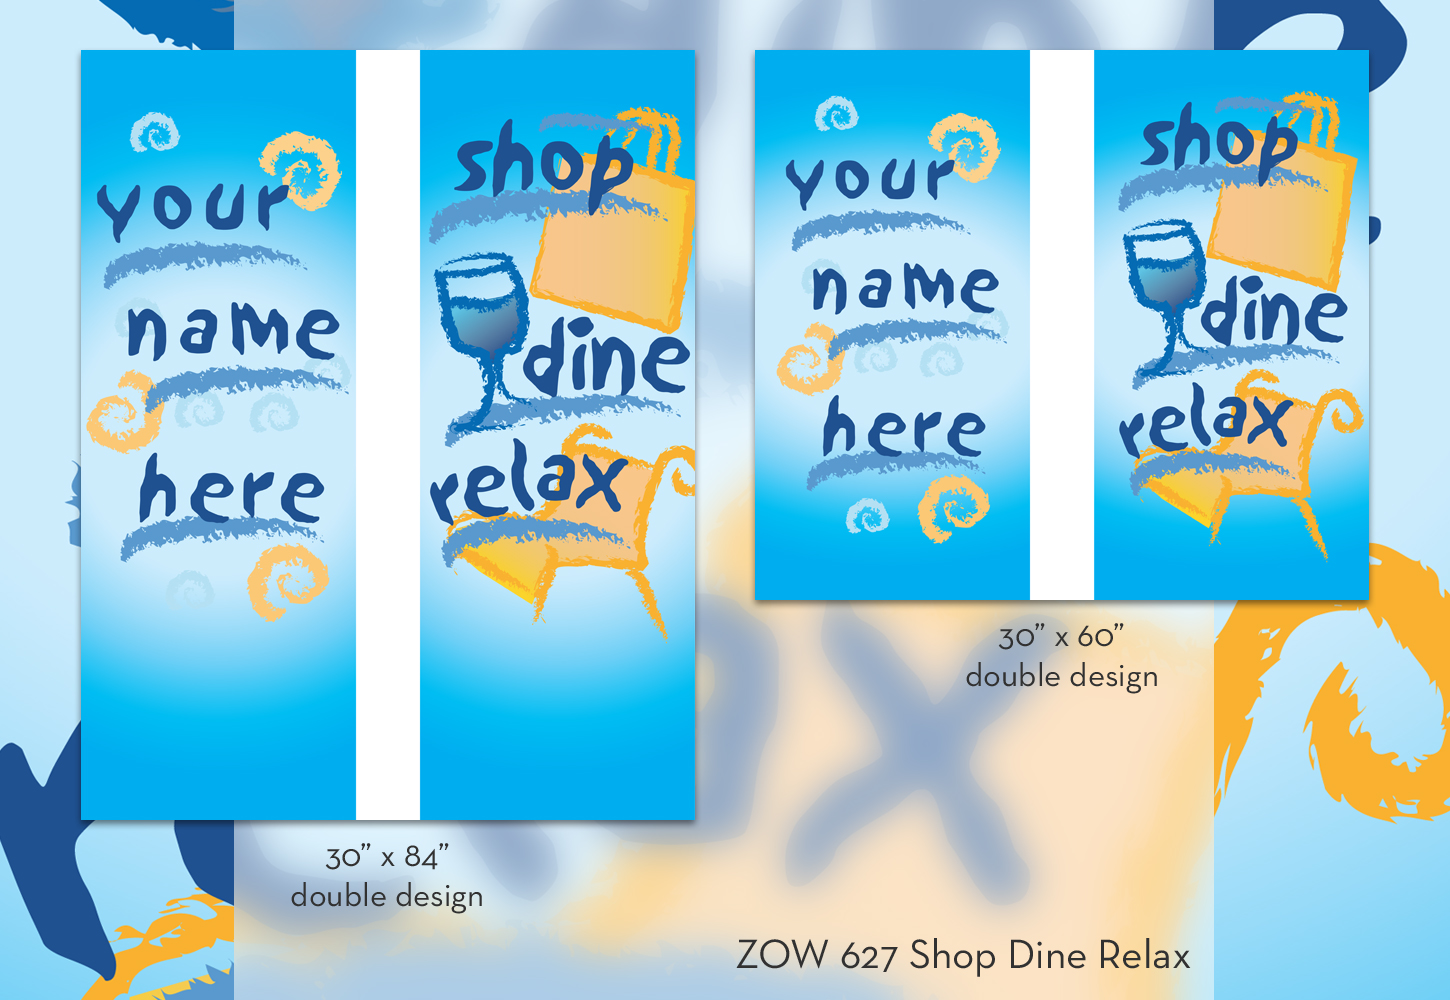 ZOW 627 Shop Dine Relax